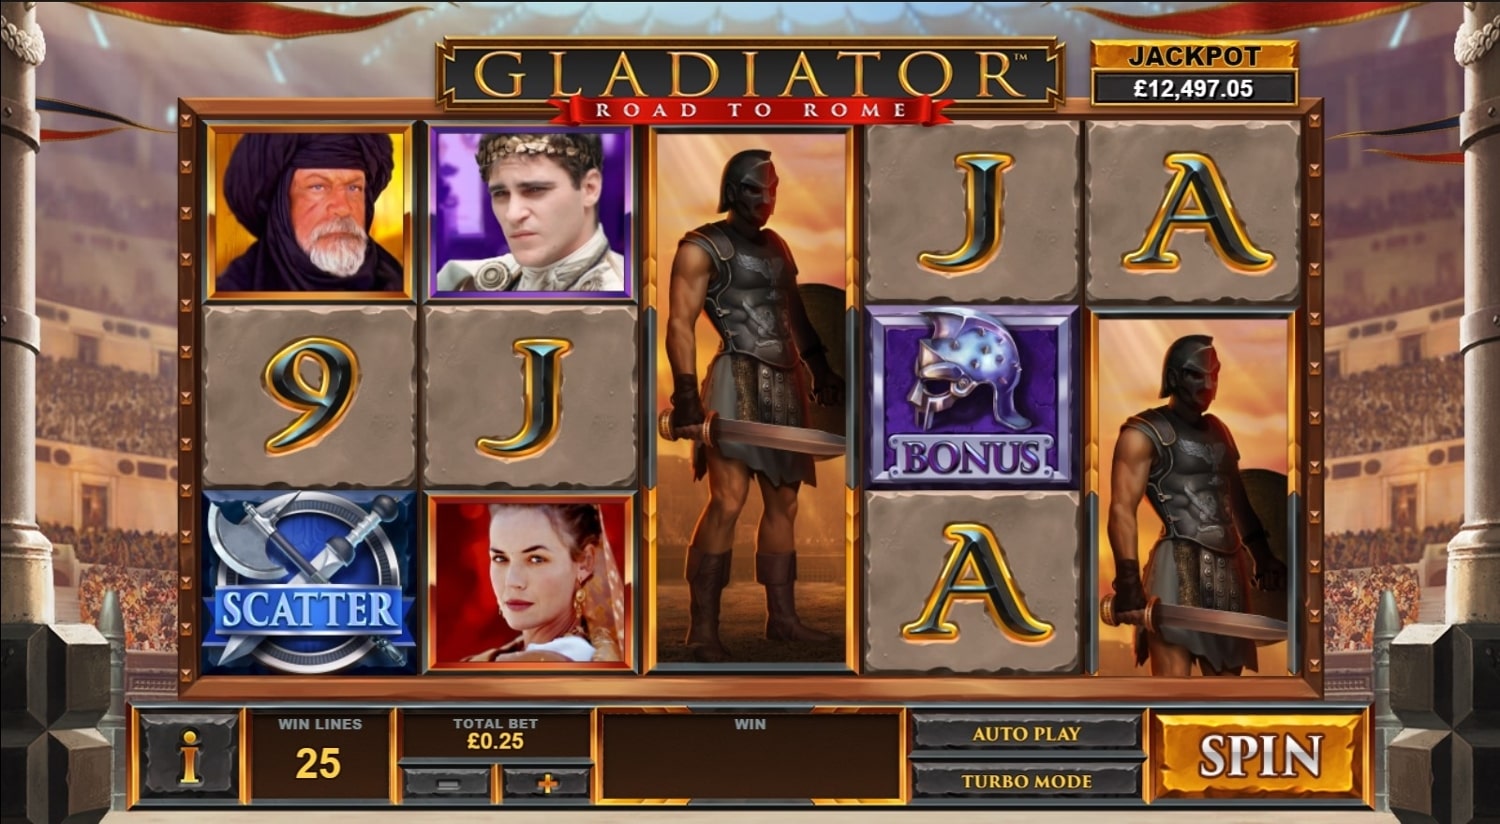 Gladiator: Road to Rome Free Spins